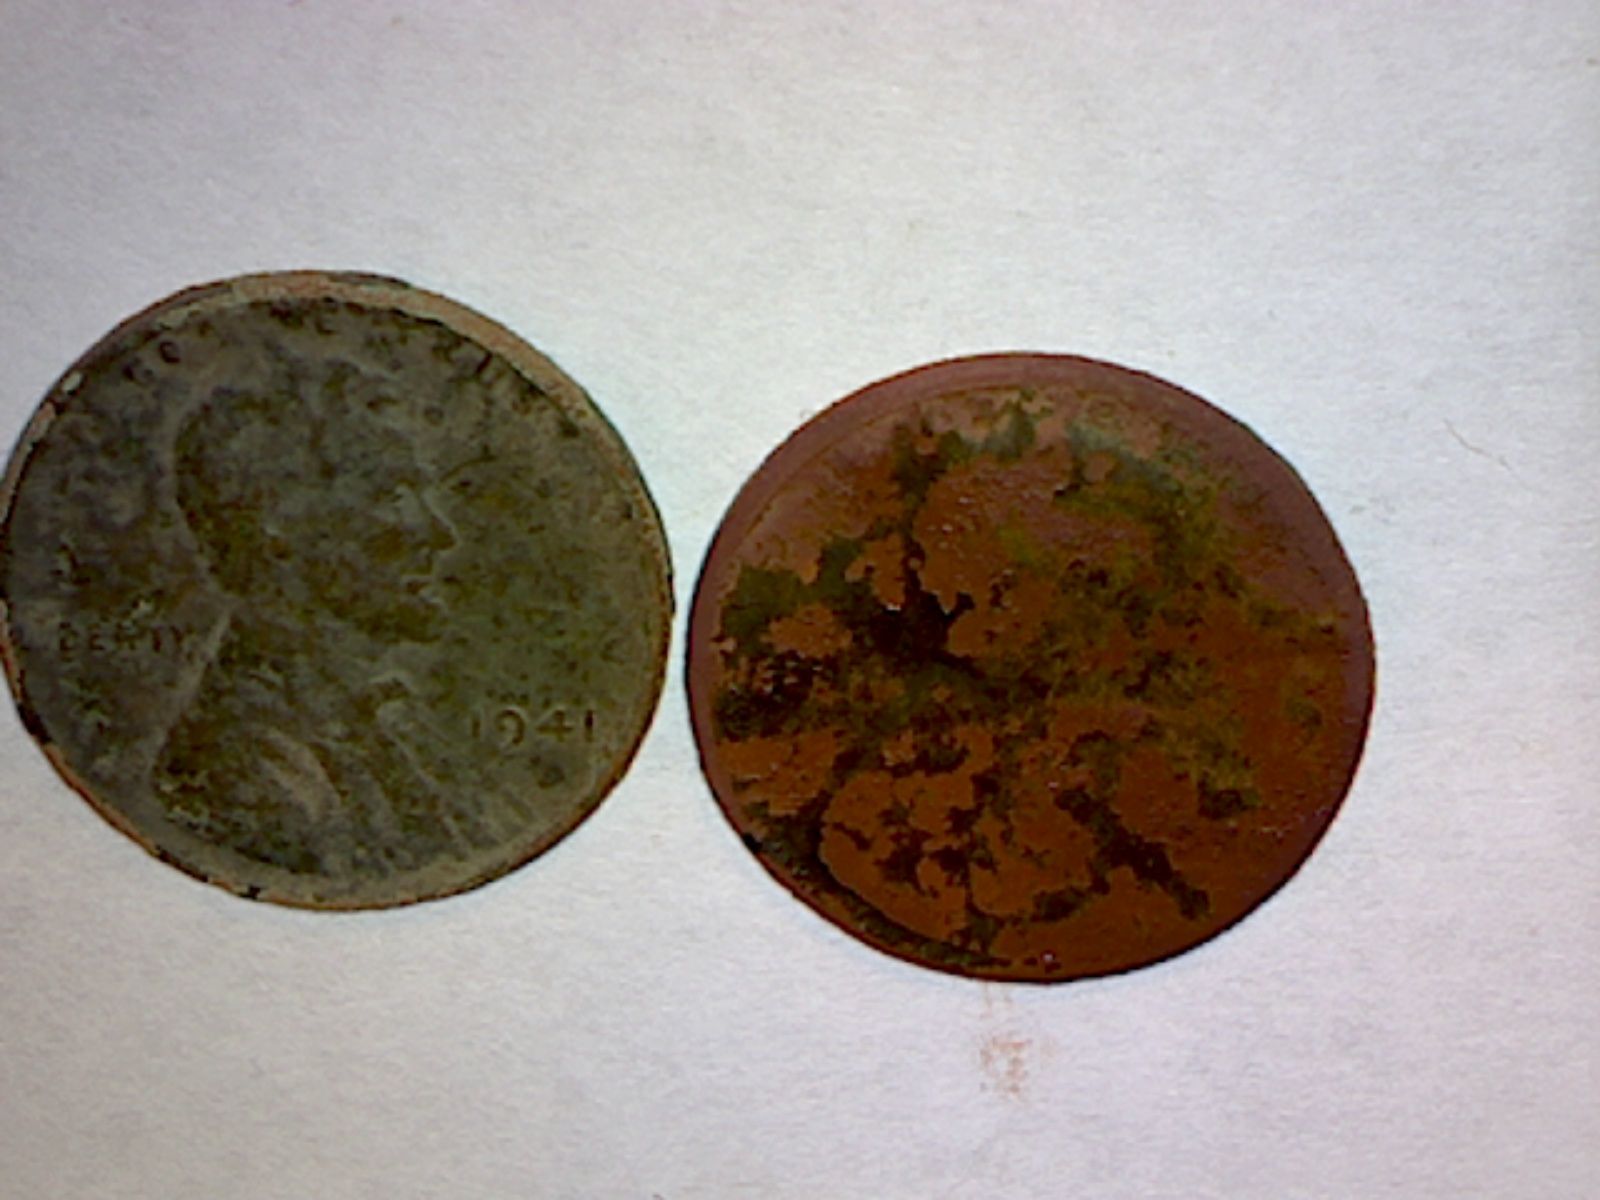 1941 and 1950 Wheat Penny